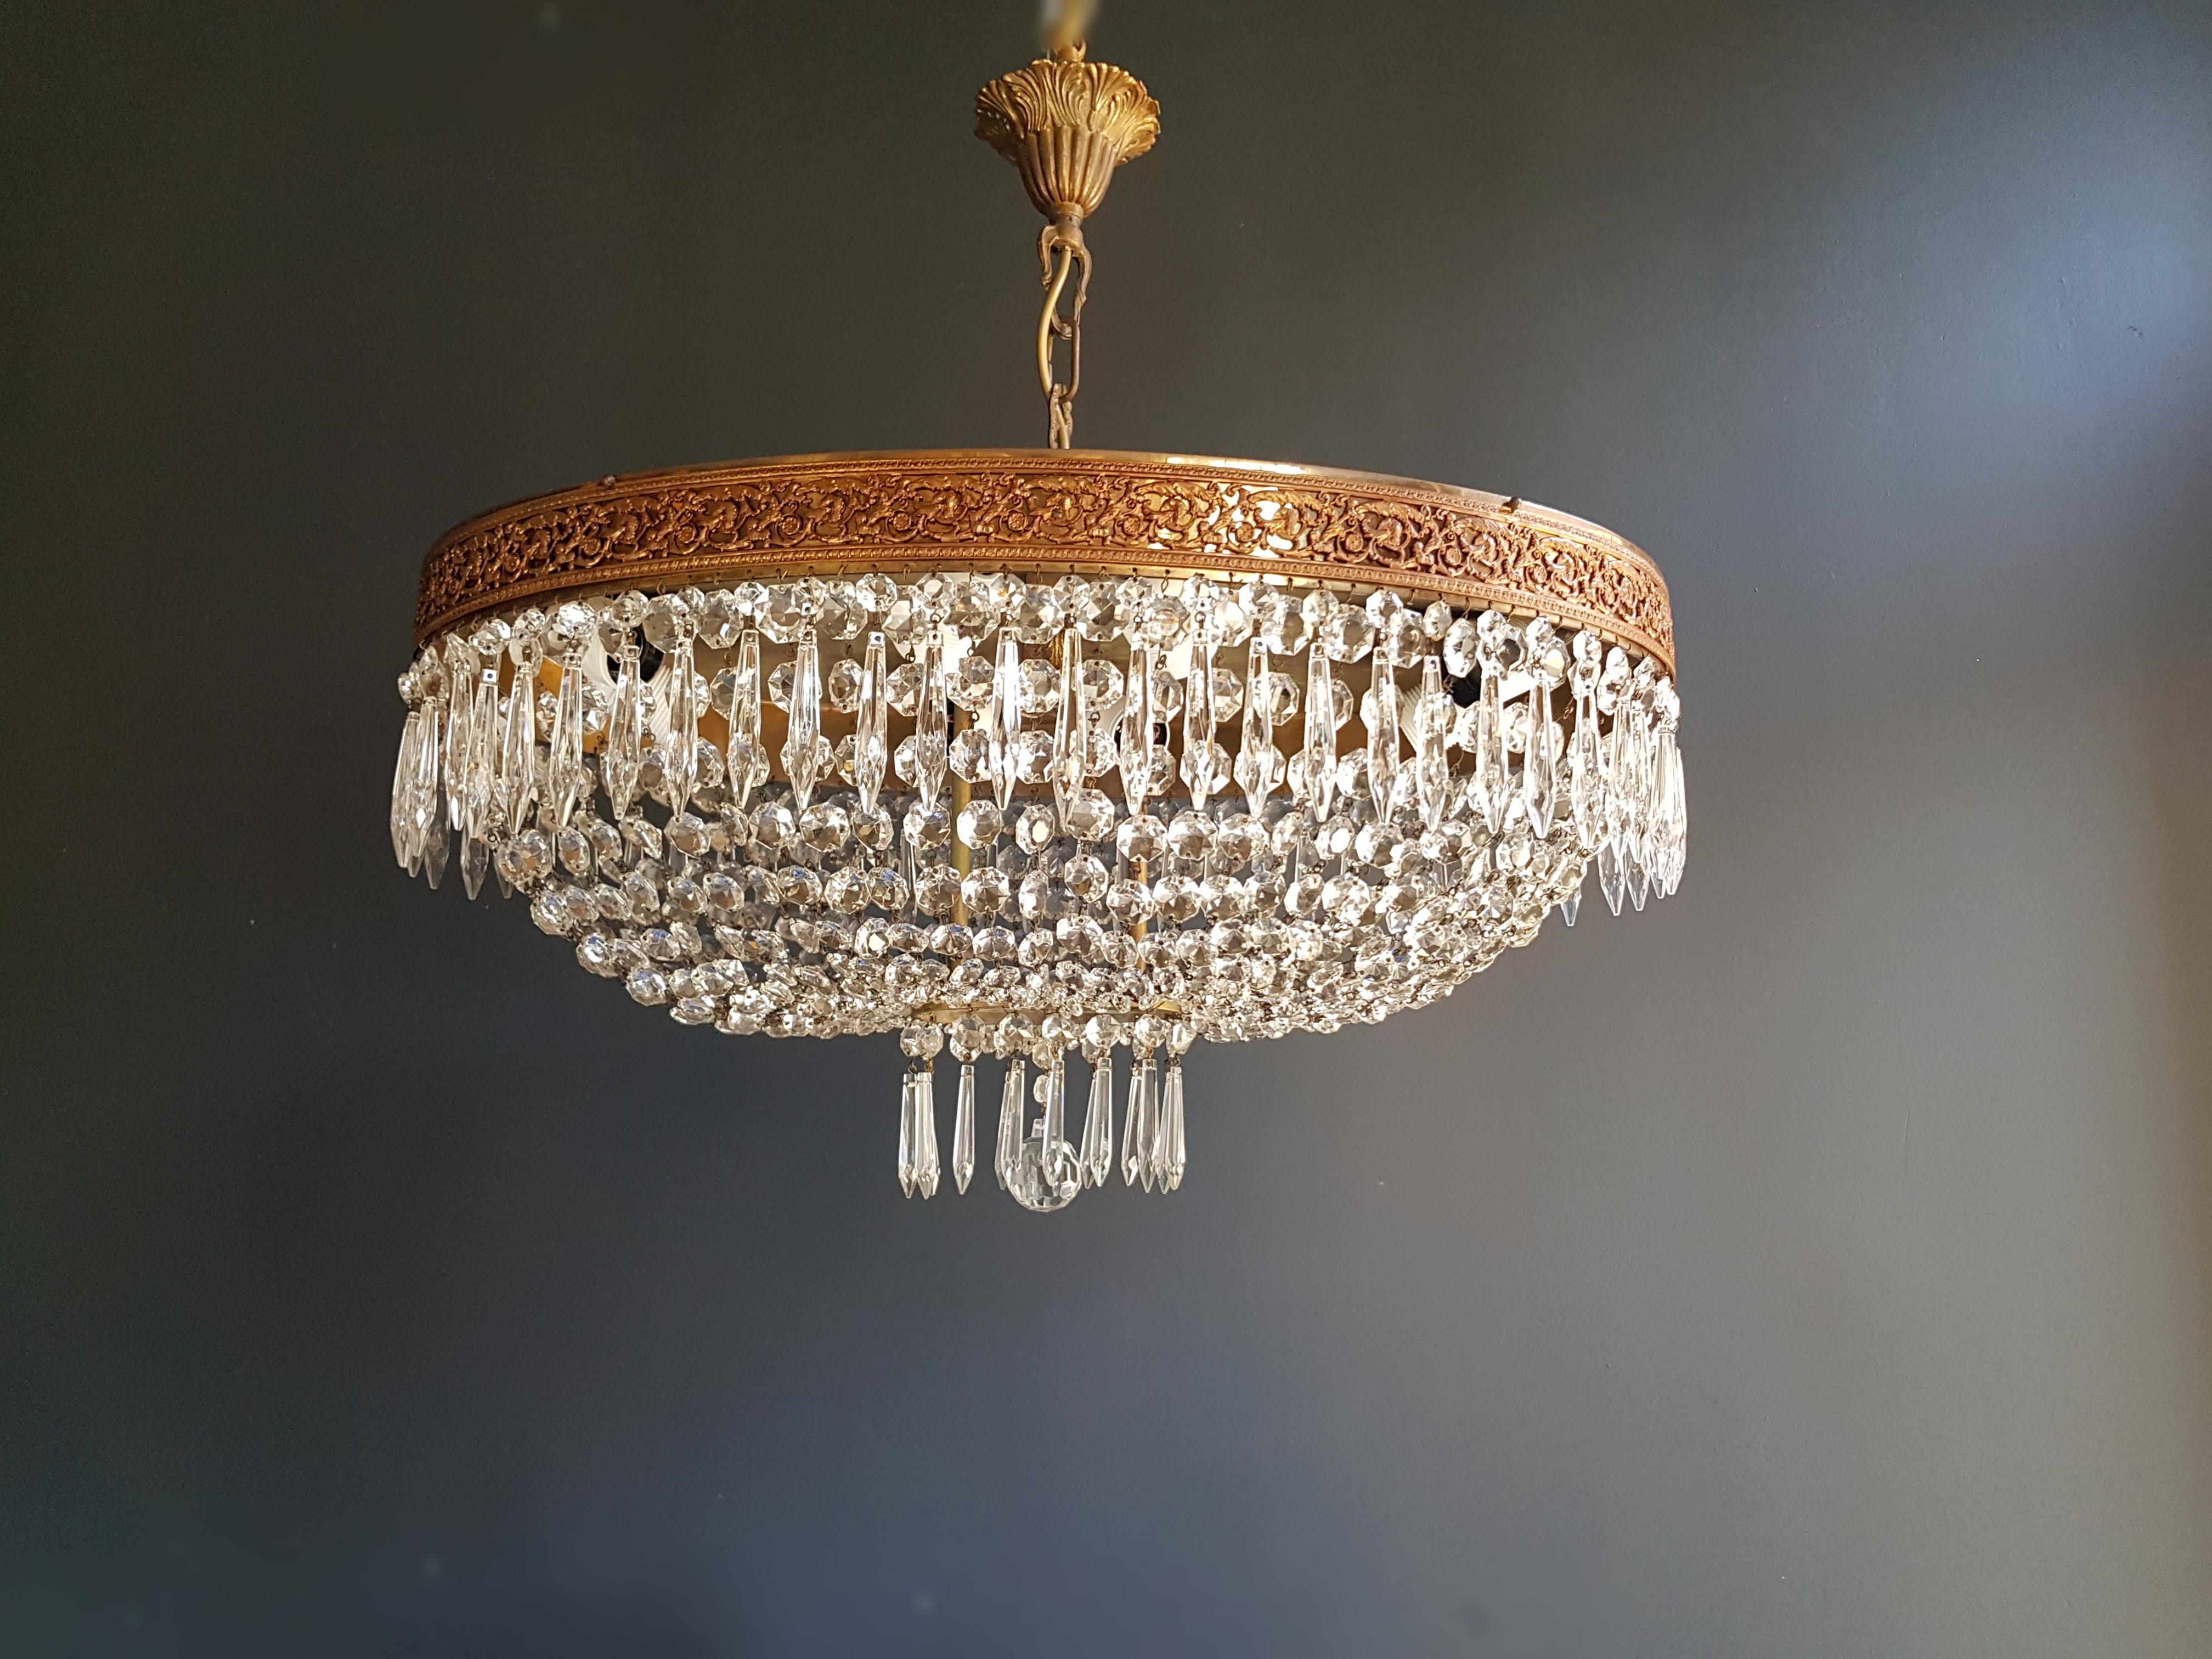 Low oval ceiling crystal chandelier brass.
Cabling completely renewed. Crystal hand knotted.
Measures: Total height 60 cm, height without chain 30 cm, diameter 42 x 65 cm. weight (approximately) 6kg.

Number of lights: 8-light bulb sockets: